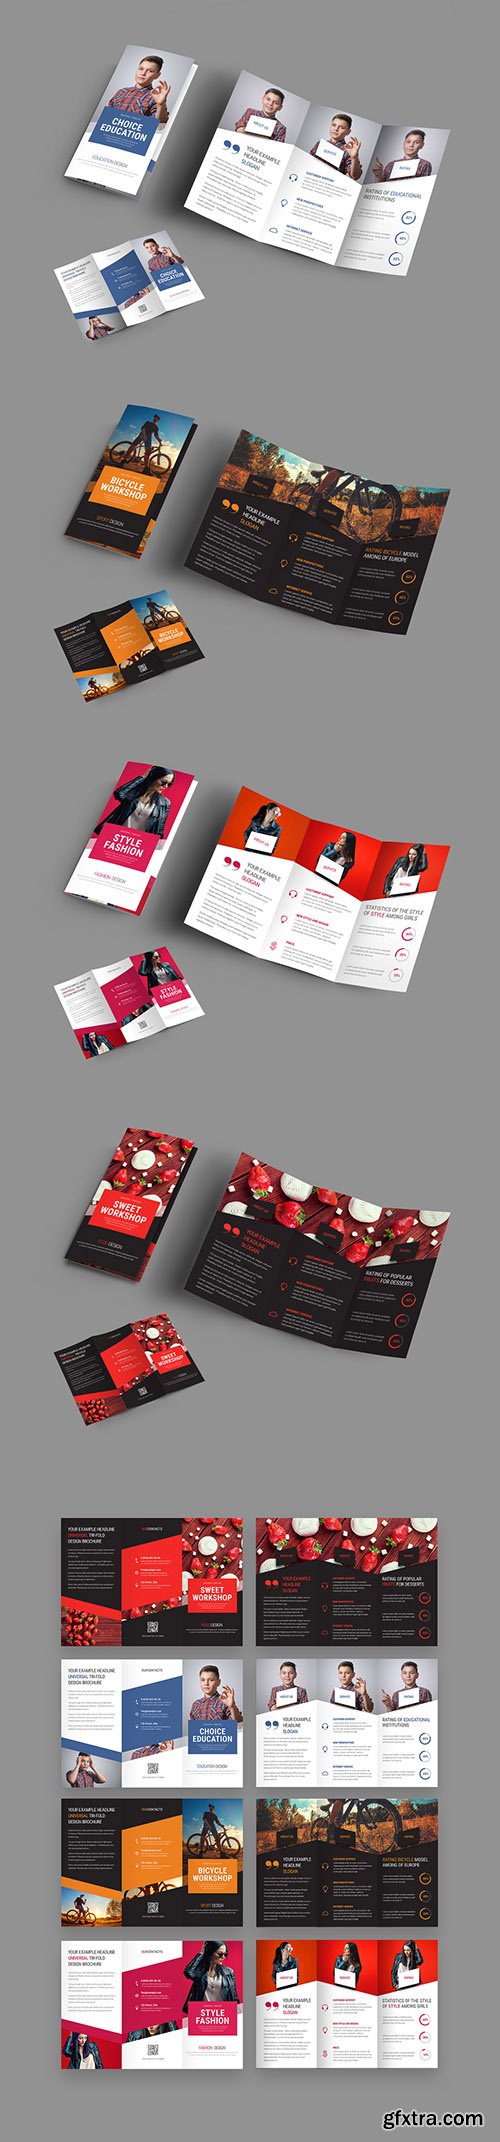 4 Trifold Brochures with Diagonal Design Elements 198254189